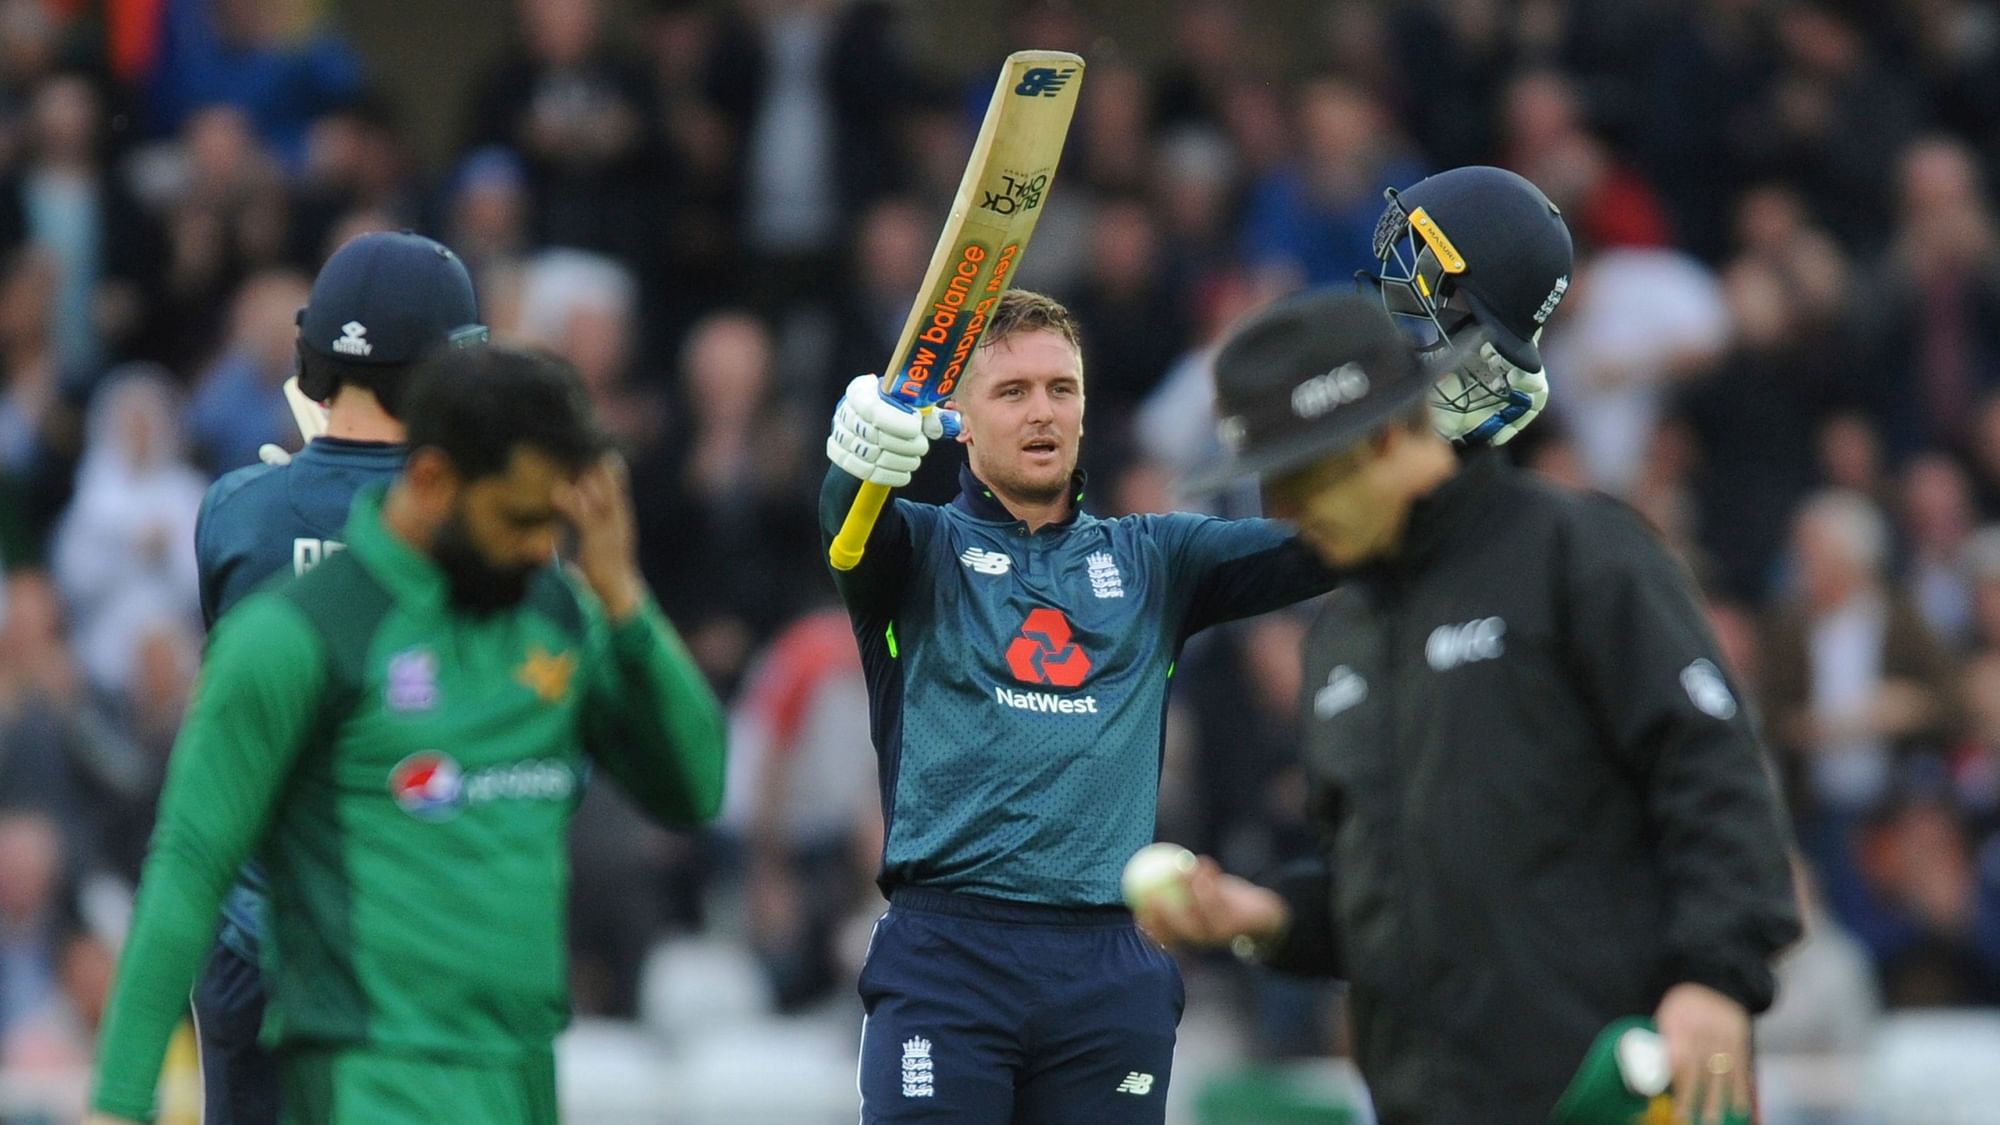 Jason Roy smashed 114 and Ben Stokes finished on 71 not out as England chased down a target of 341.